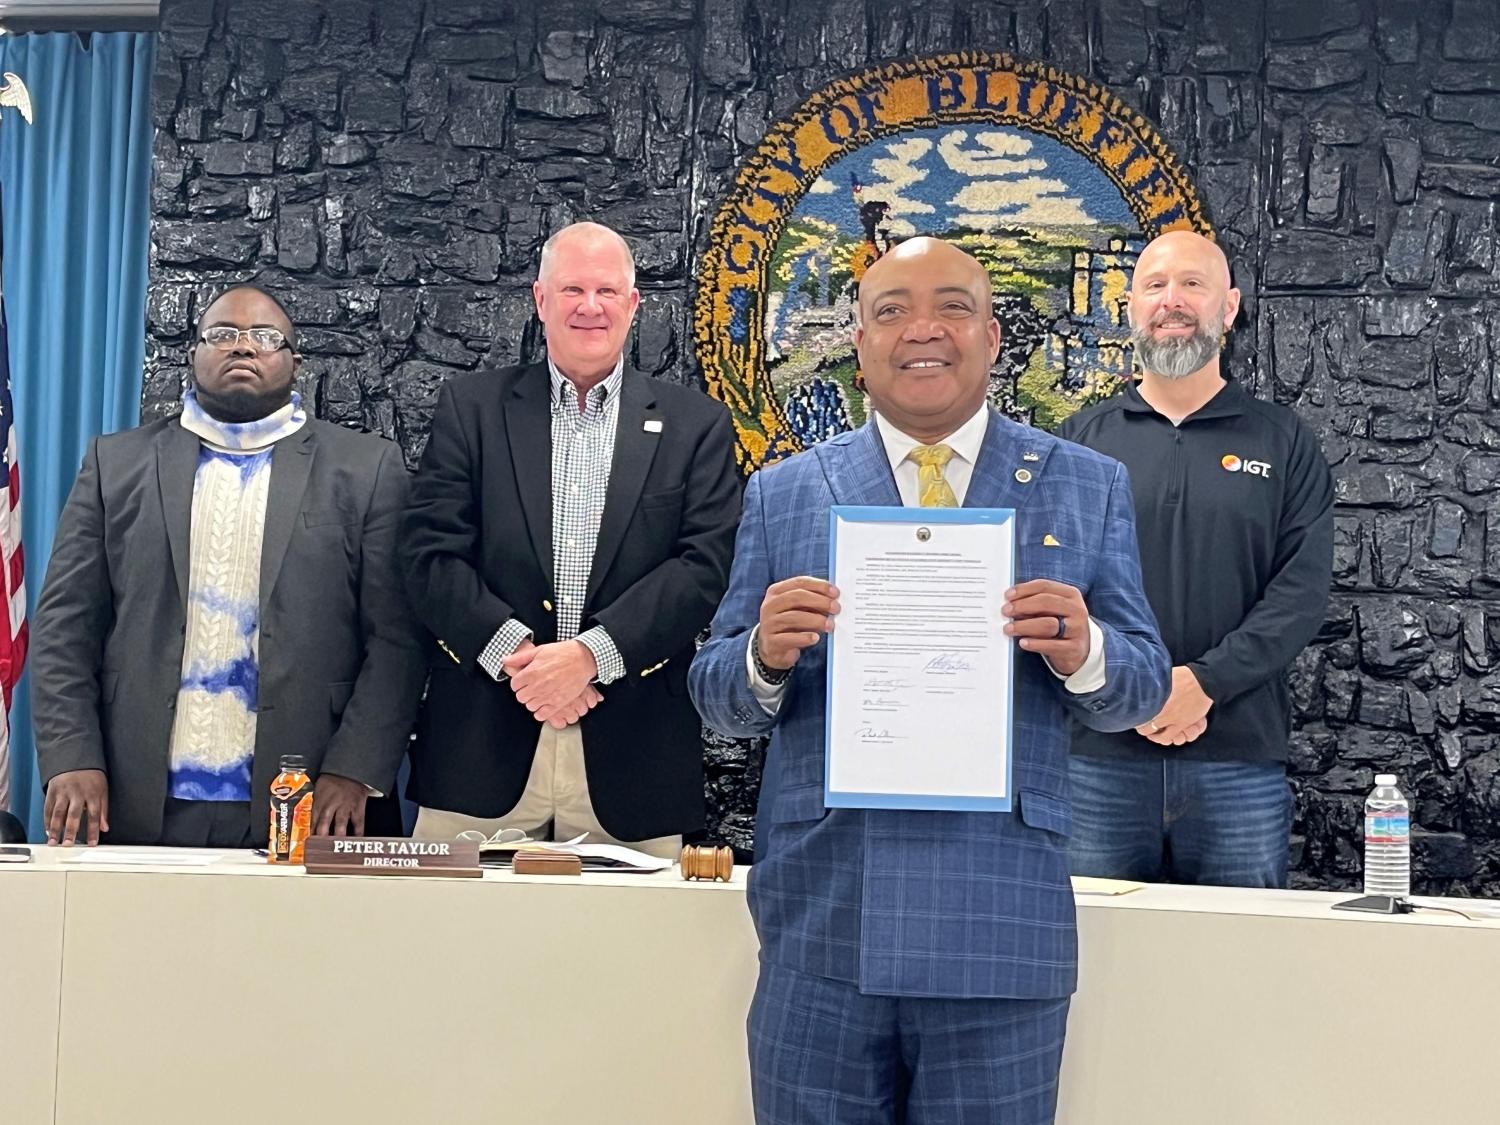 The Reverend Garry Moore (foreground) was honored by the Bluefield City Board of Directors at its November 22 meeting.  Moore, the first Chancellor in Bluefield State University’s history, received a resolution citing his service to church, community, and BSU.  Pictured (second row, left-to-right) are Board members Treyvon Simmons, Peter Taylor, and Matt Knowles.